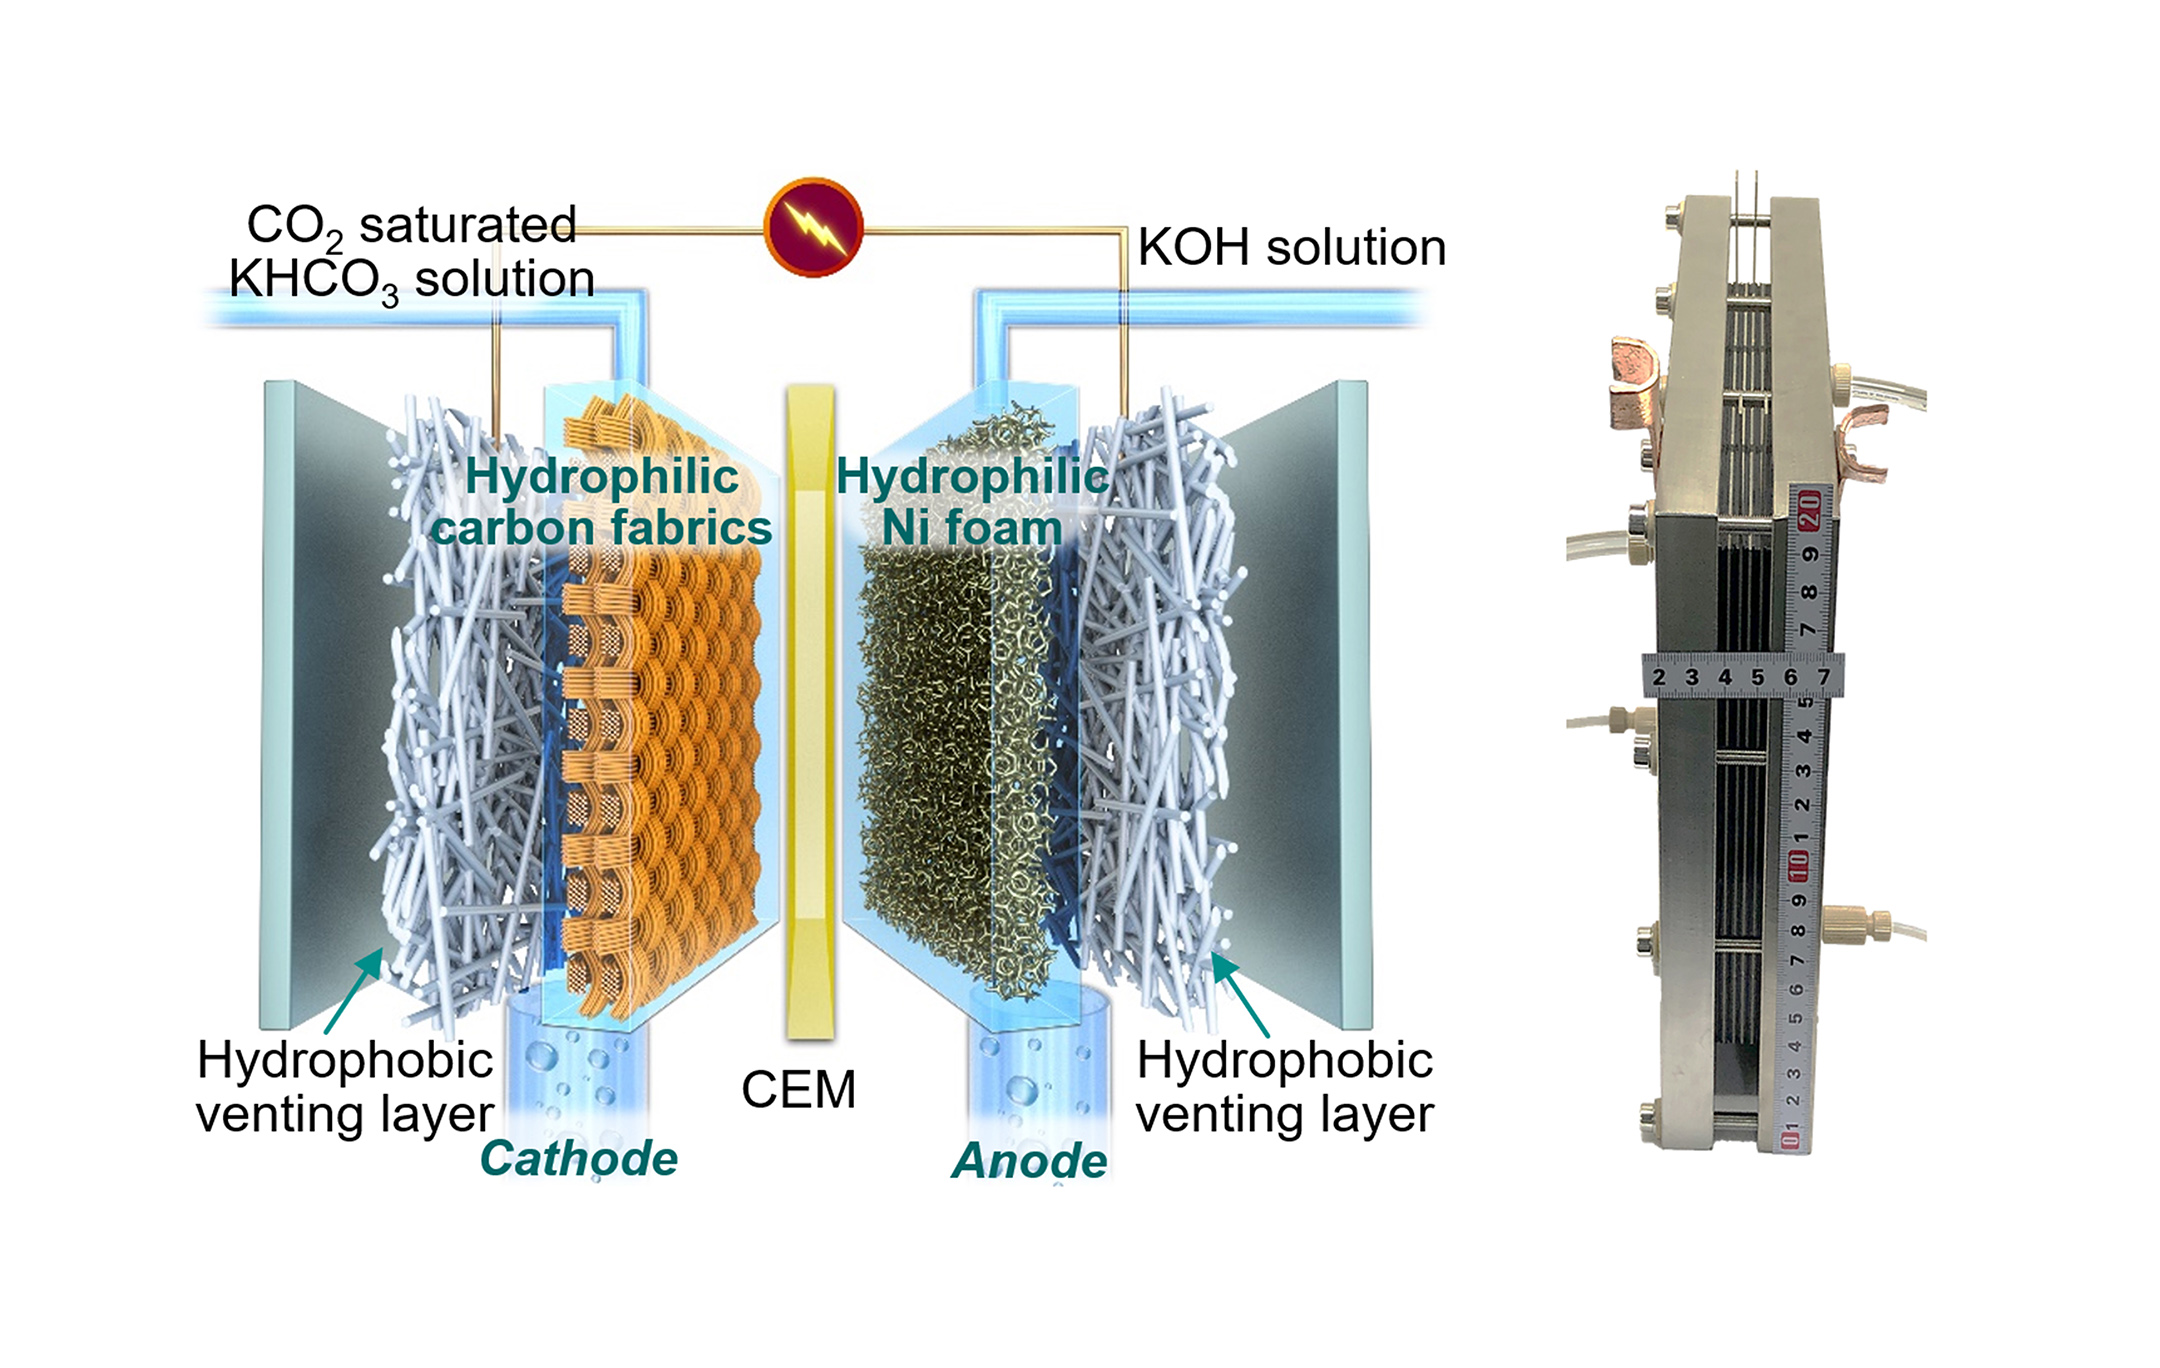 Left: a schematic showing the key components of the reactor and working mechanism. Right: a picture of a CO2 stack